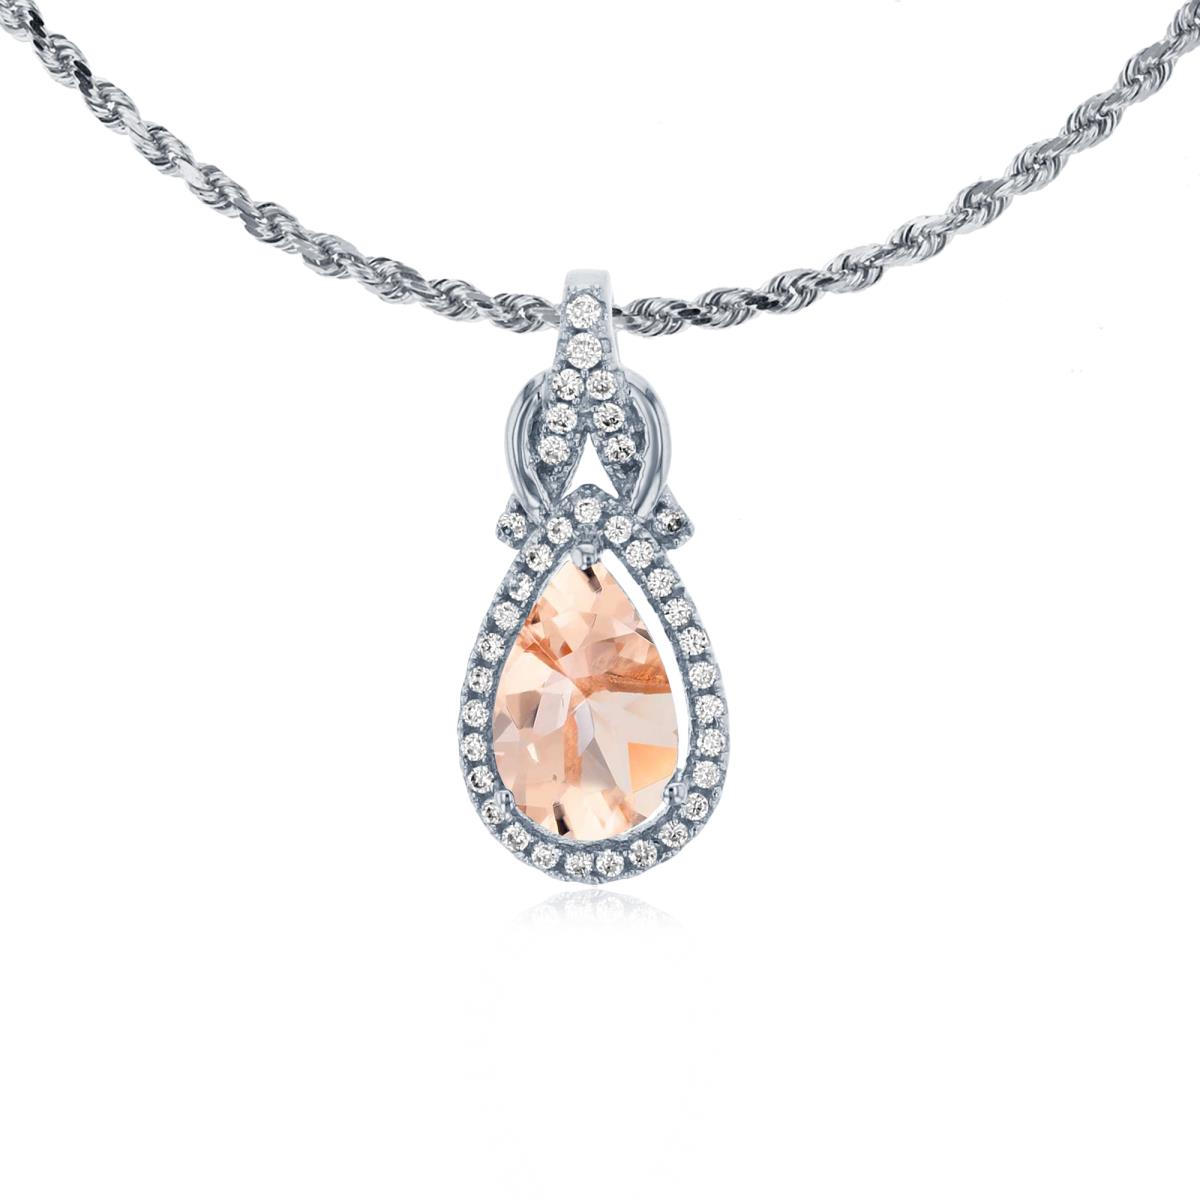 10K White Gold 8x5mm Pear Cut Morganite & 0.11 CTTW Rnd Diamond Knot 18" Rope Chain Necklace